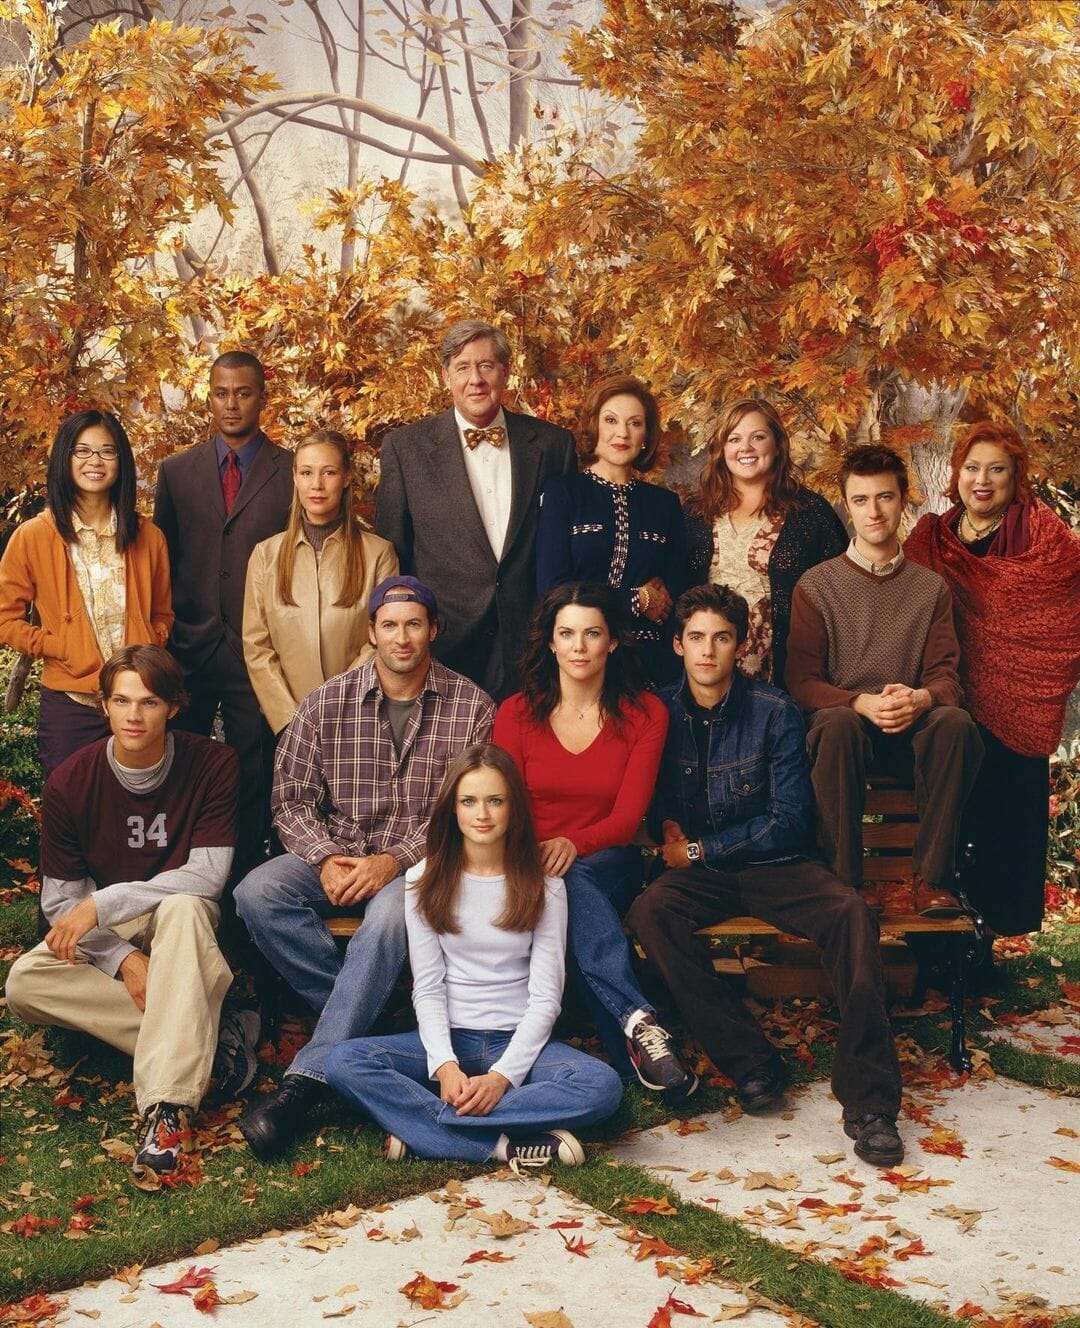 Gilmore Girls; a TV show of the 2000s